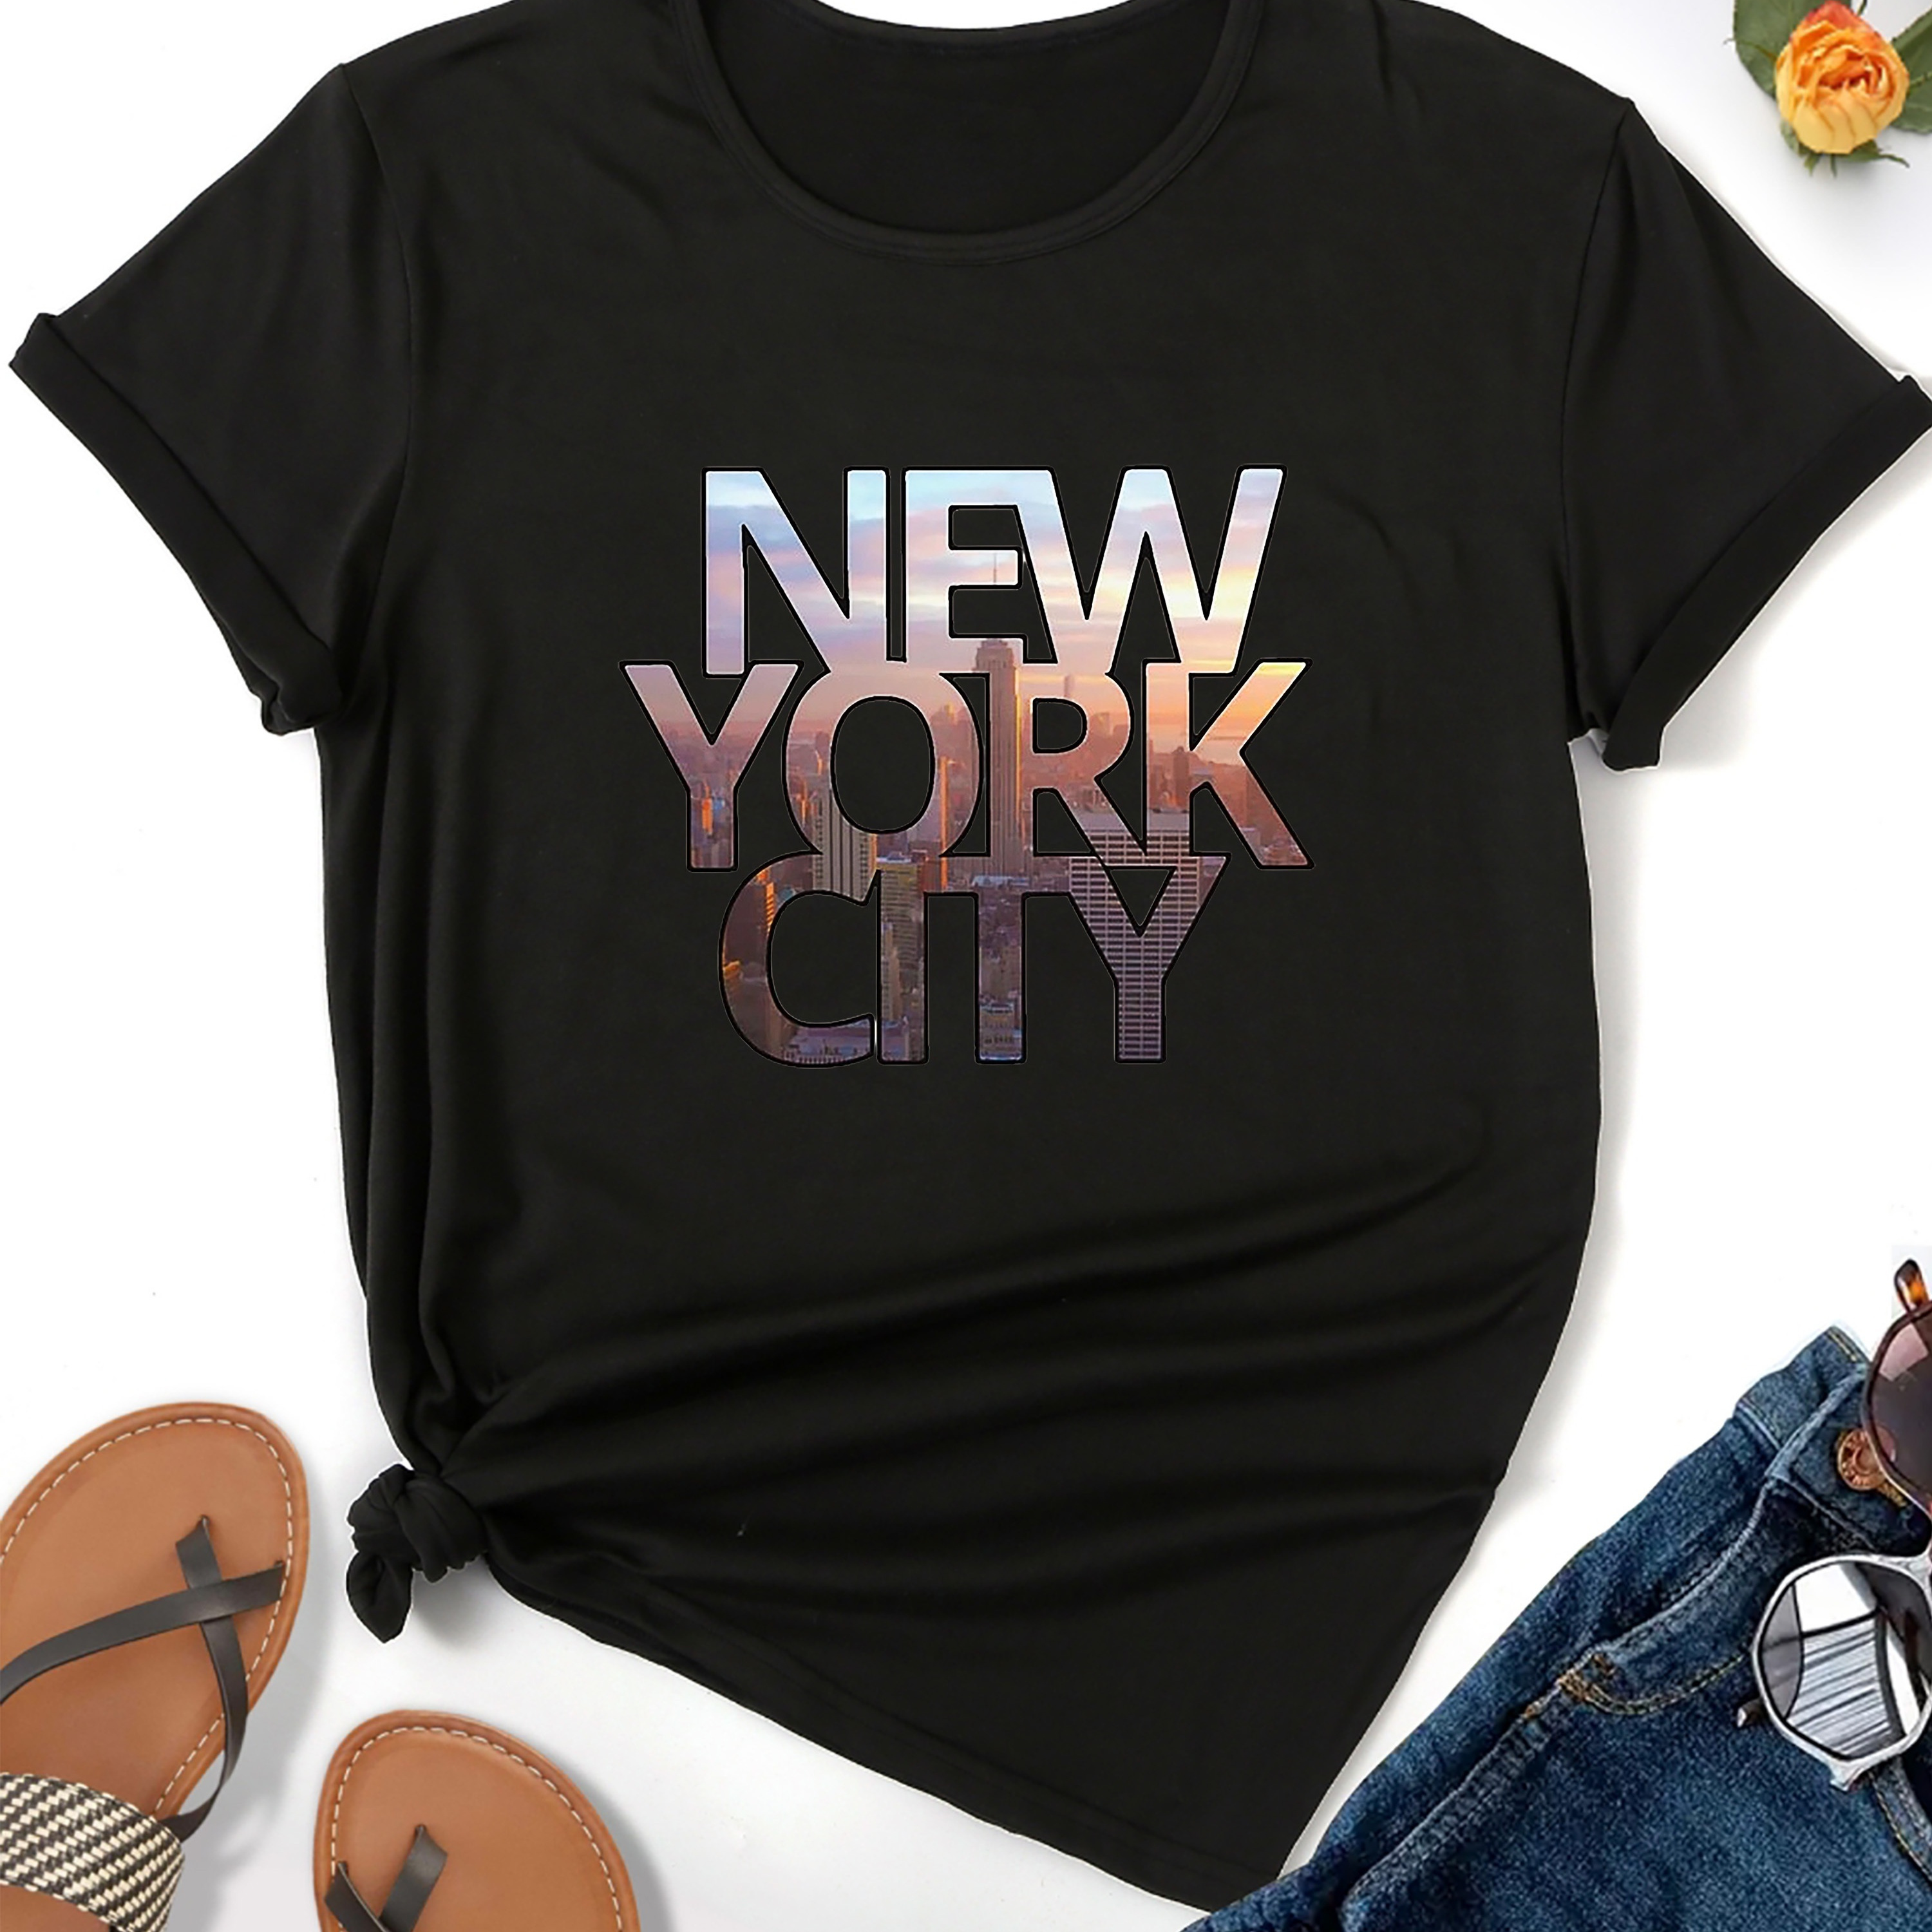 

New York City Print T-shirt, Casual Short Sleeve Crew Neck Top For Spring & Summer, Women's Clothing